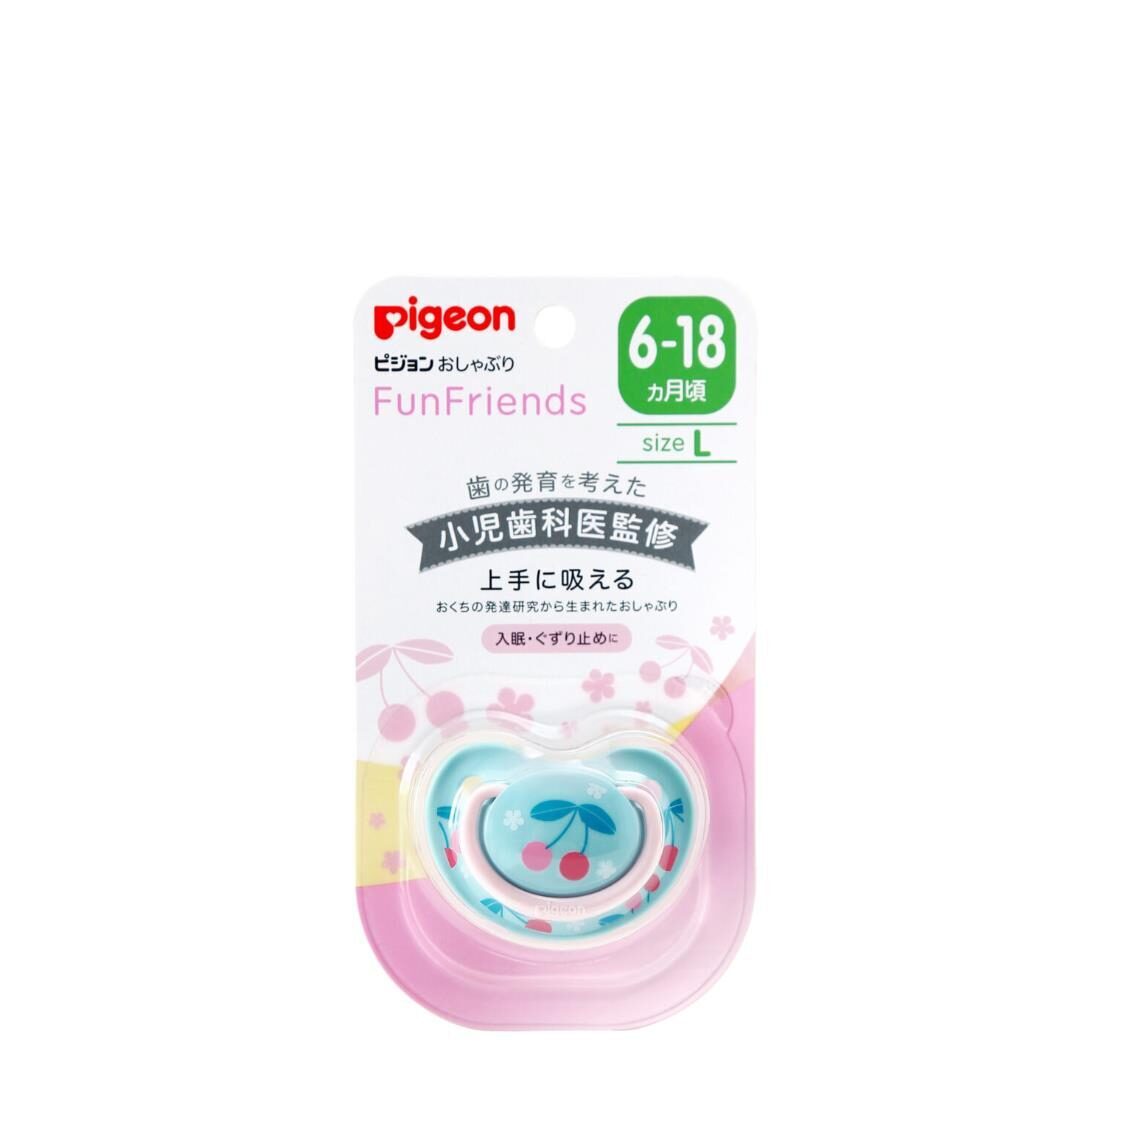 Pigeon Soother Funfriends L Size Cherry Jp